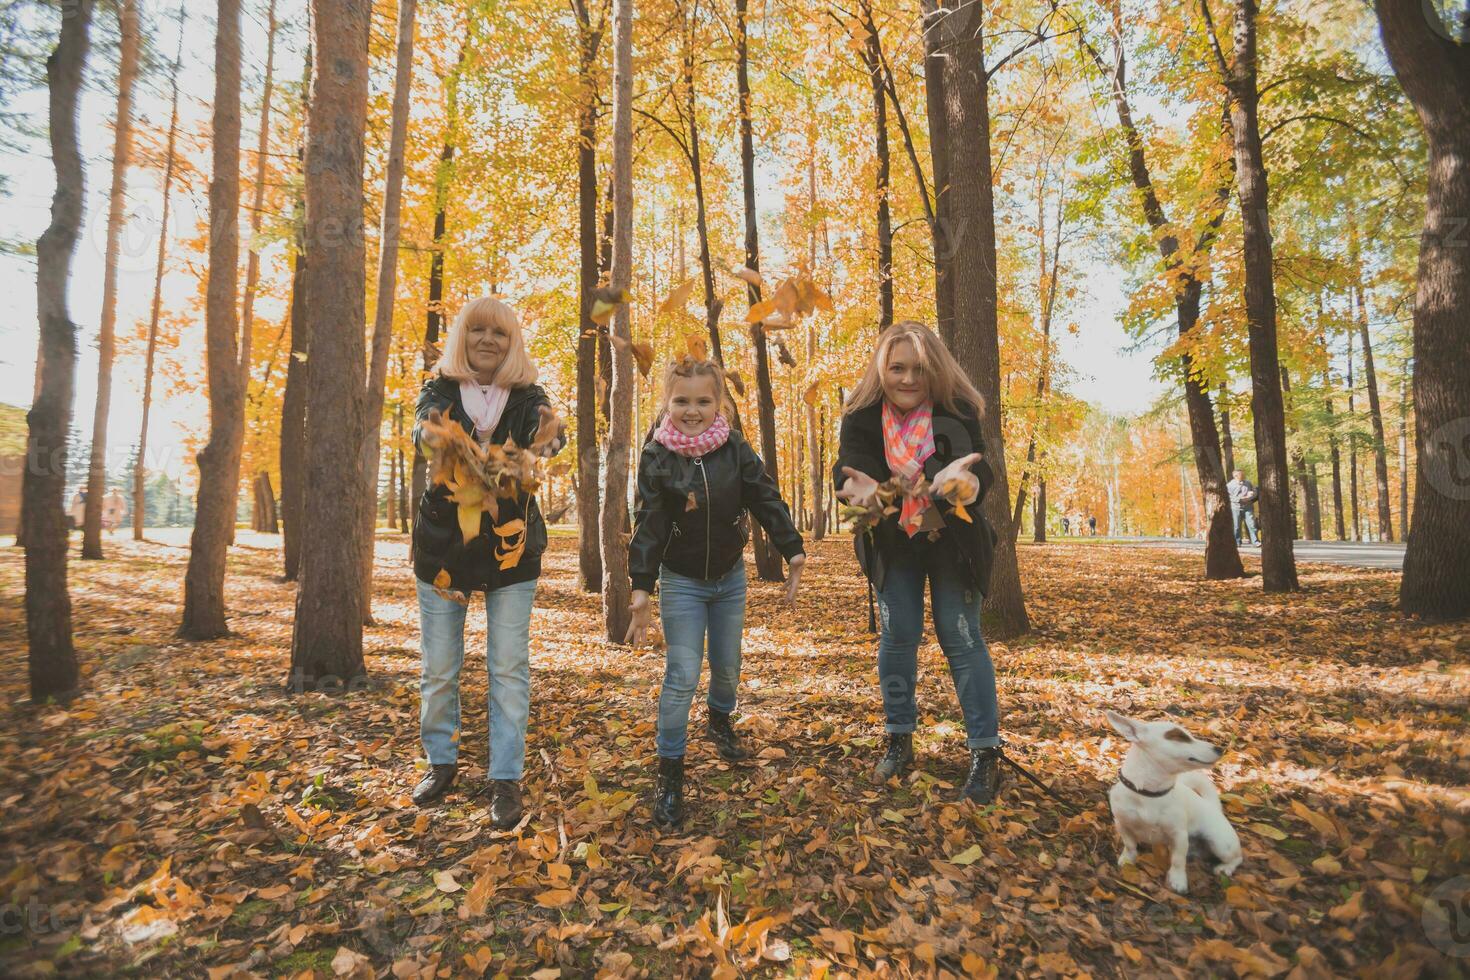 Grandmother and mother with granddaughter throw up fall leaves in autumn park and having fun. Generation, leisure and family concept. photo